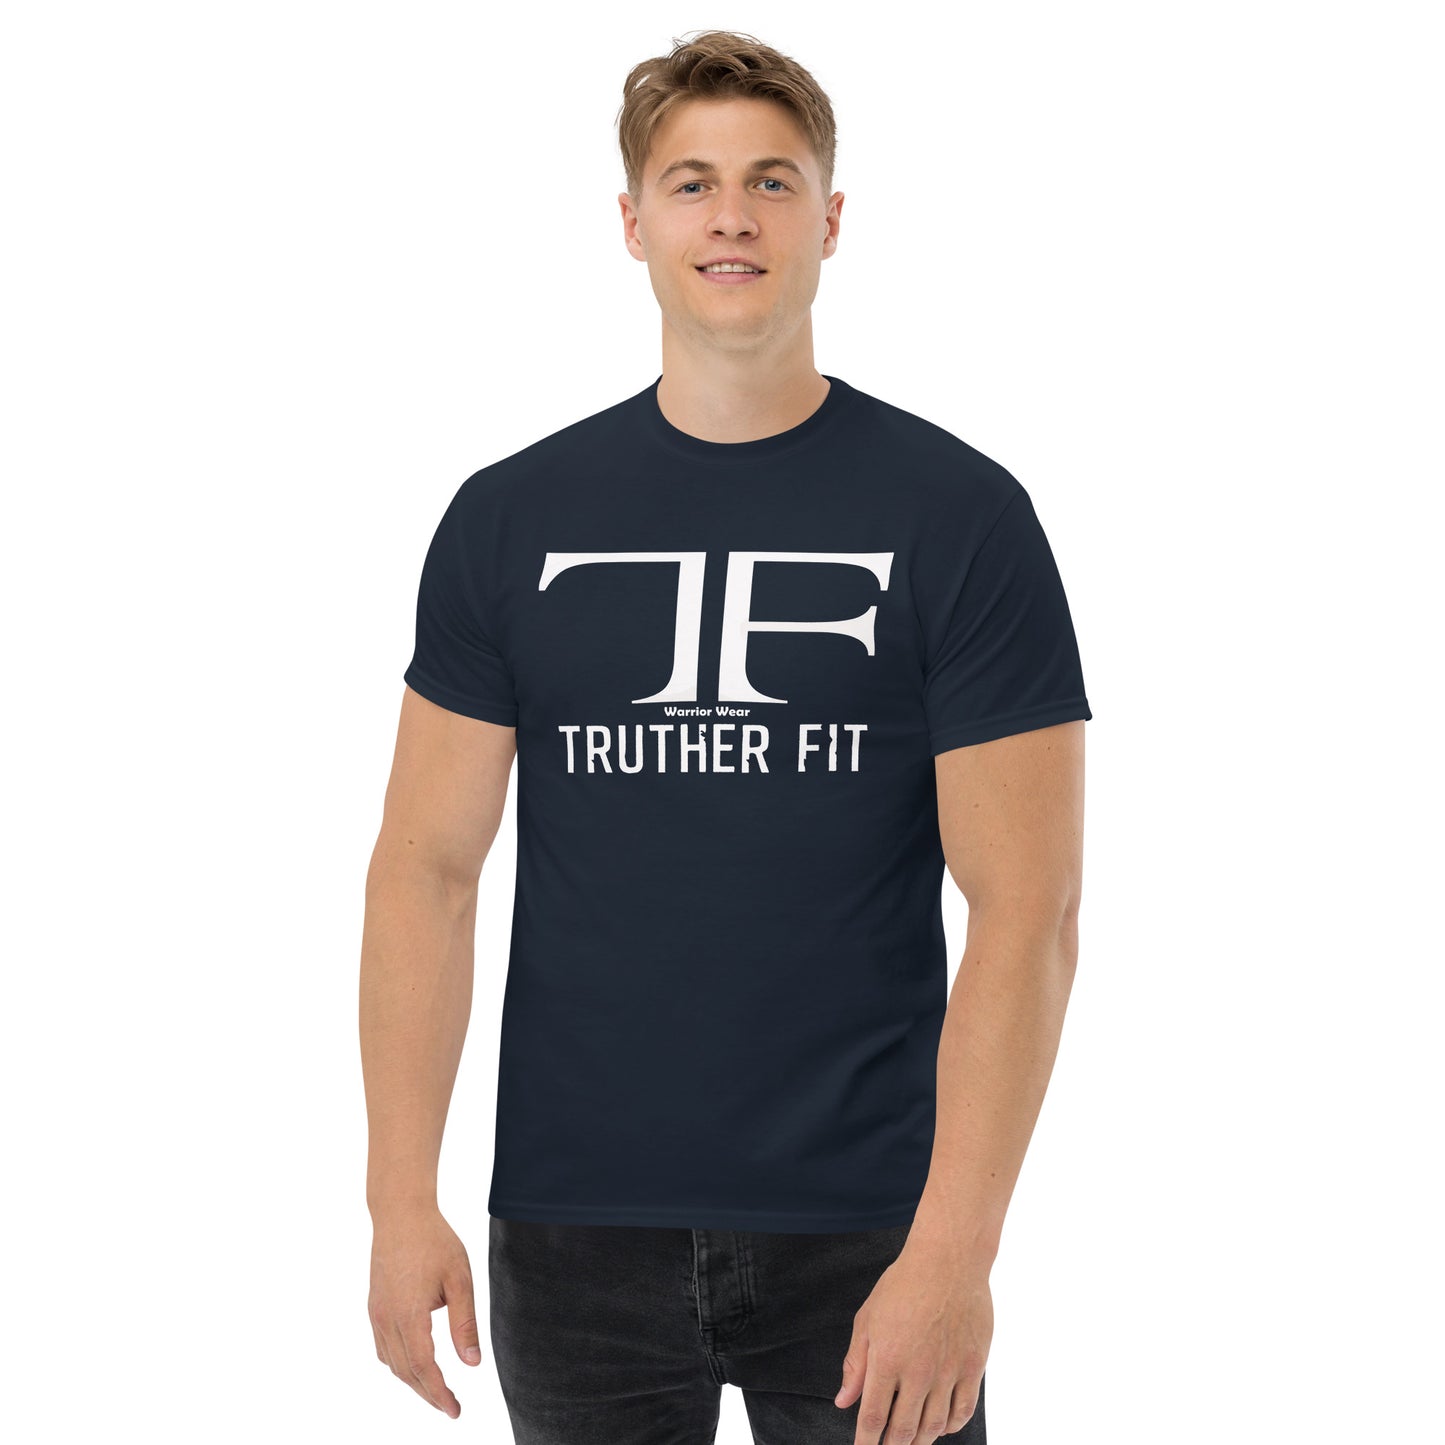 Truther Fit Men's classic tee